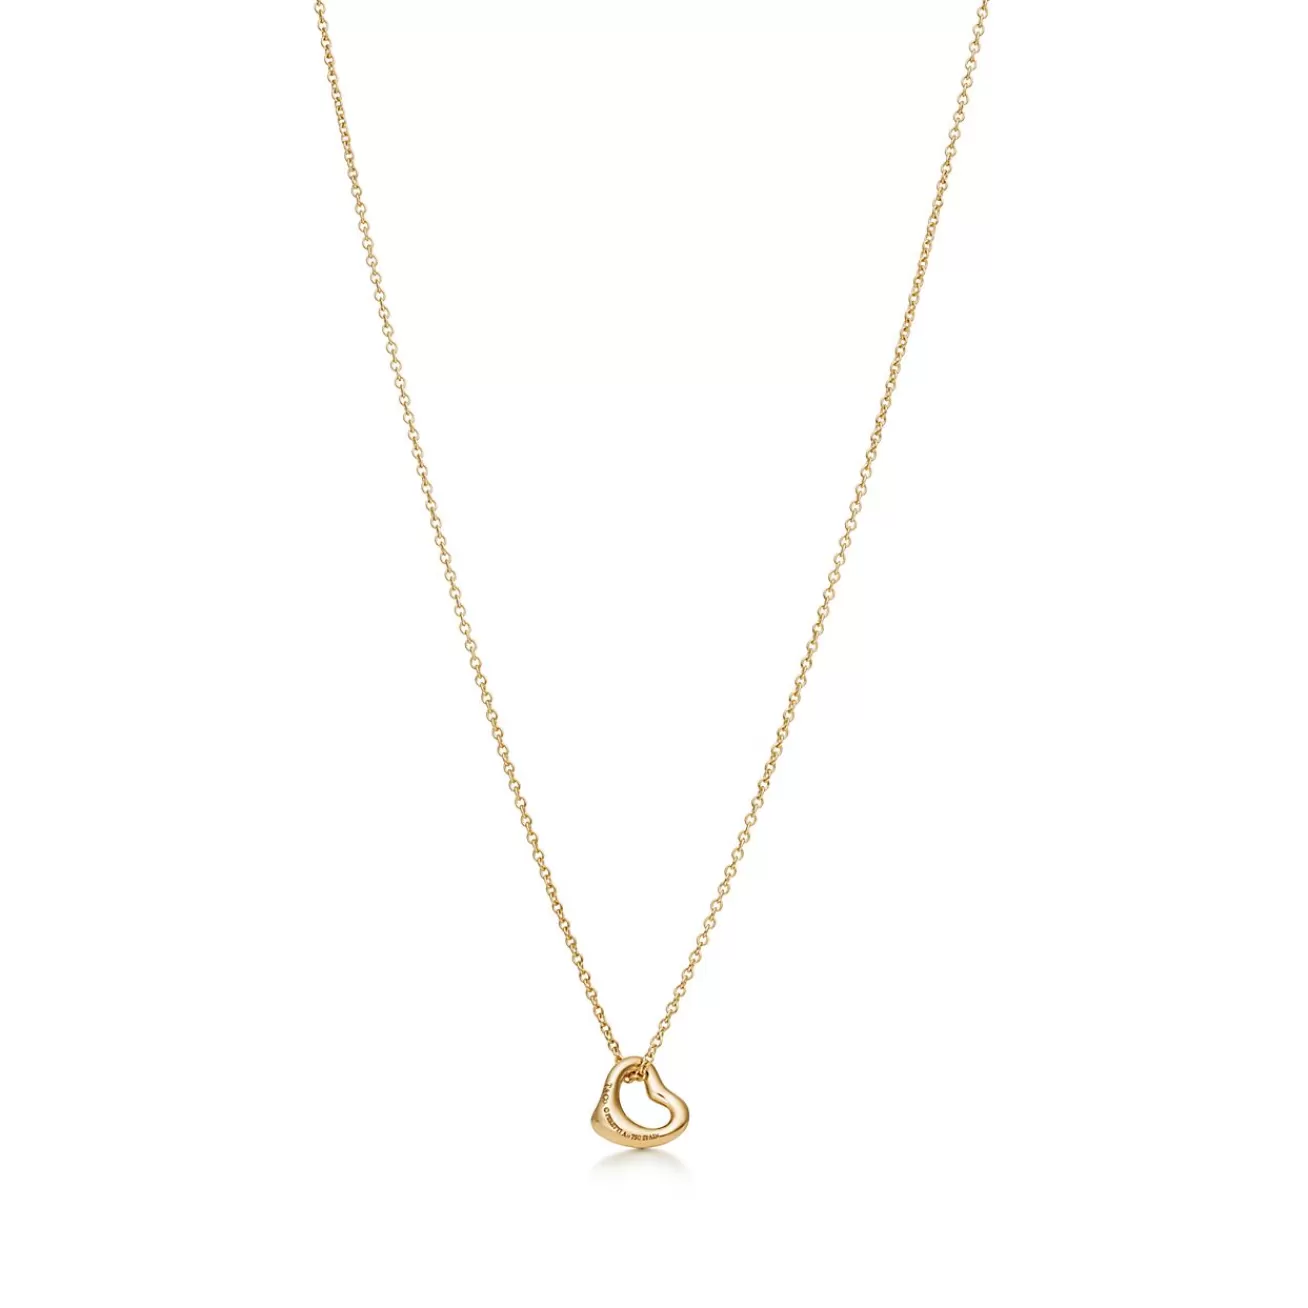 Tiffany & Co. Elsa Peretti® Open Heart Pendant in Yellow Gold, 7 mm | ^ Necklaces & Pendants | Gifts for Her